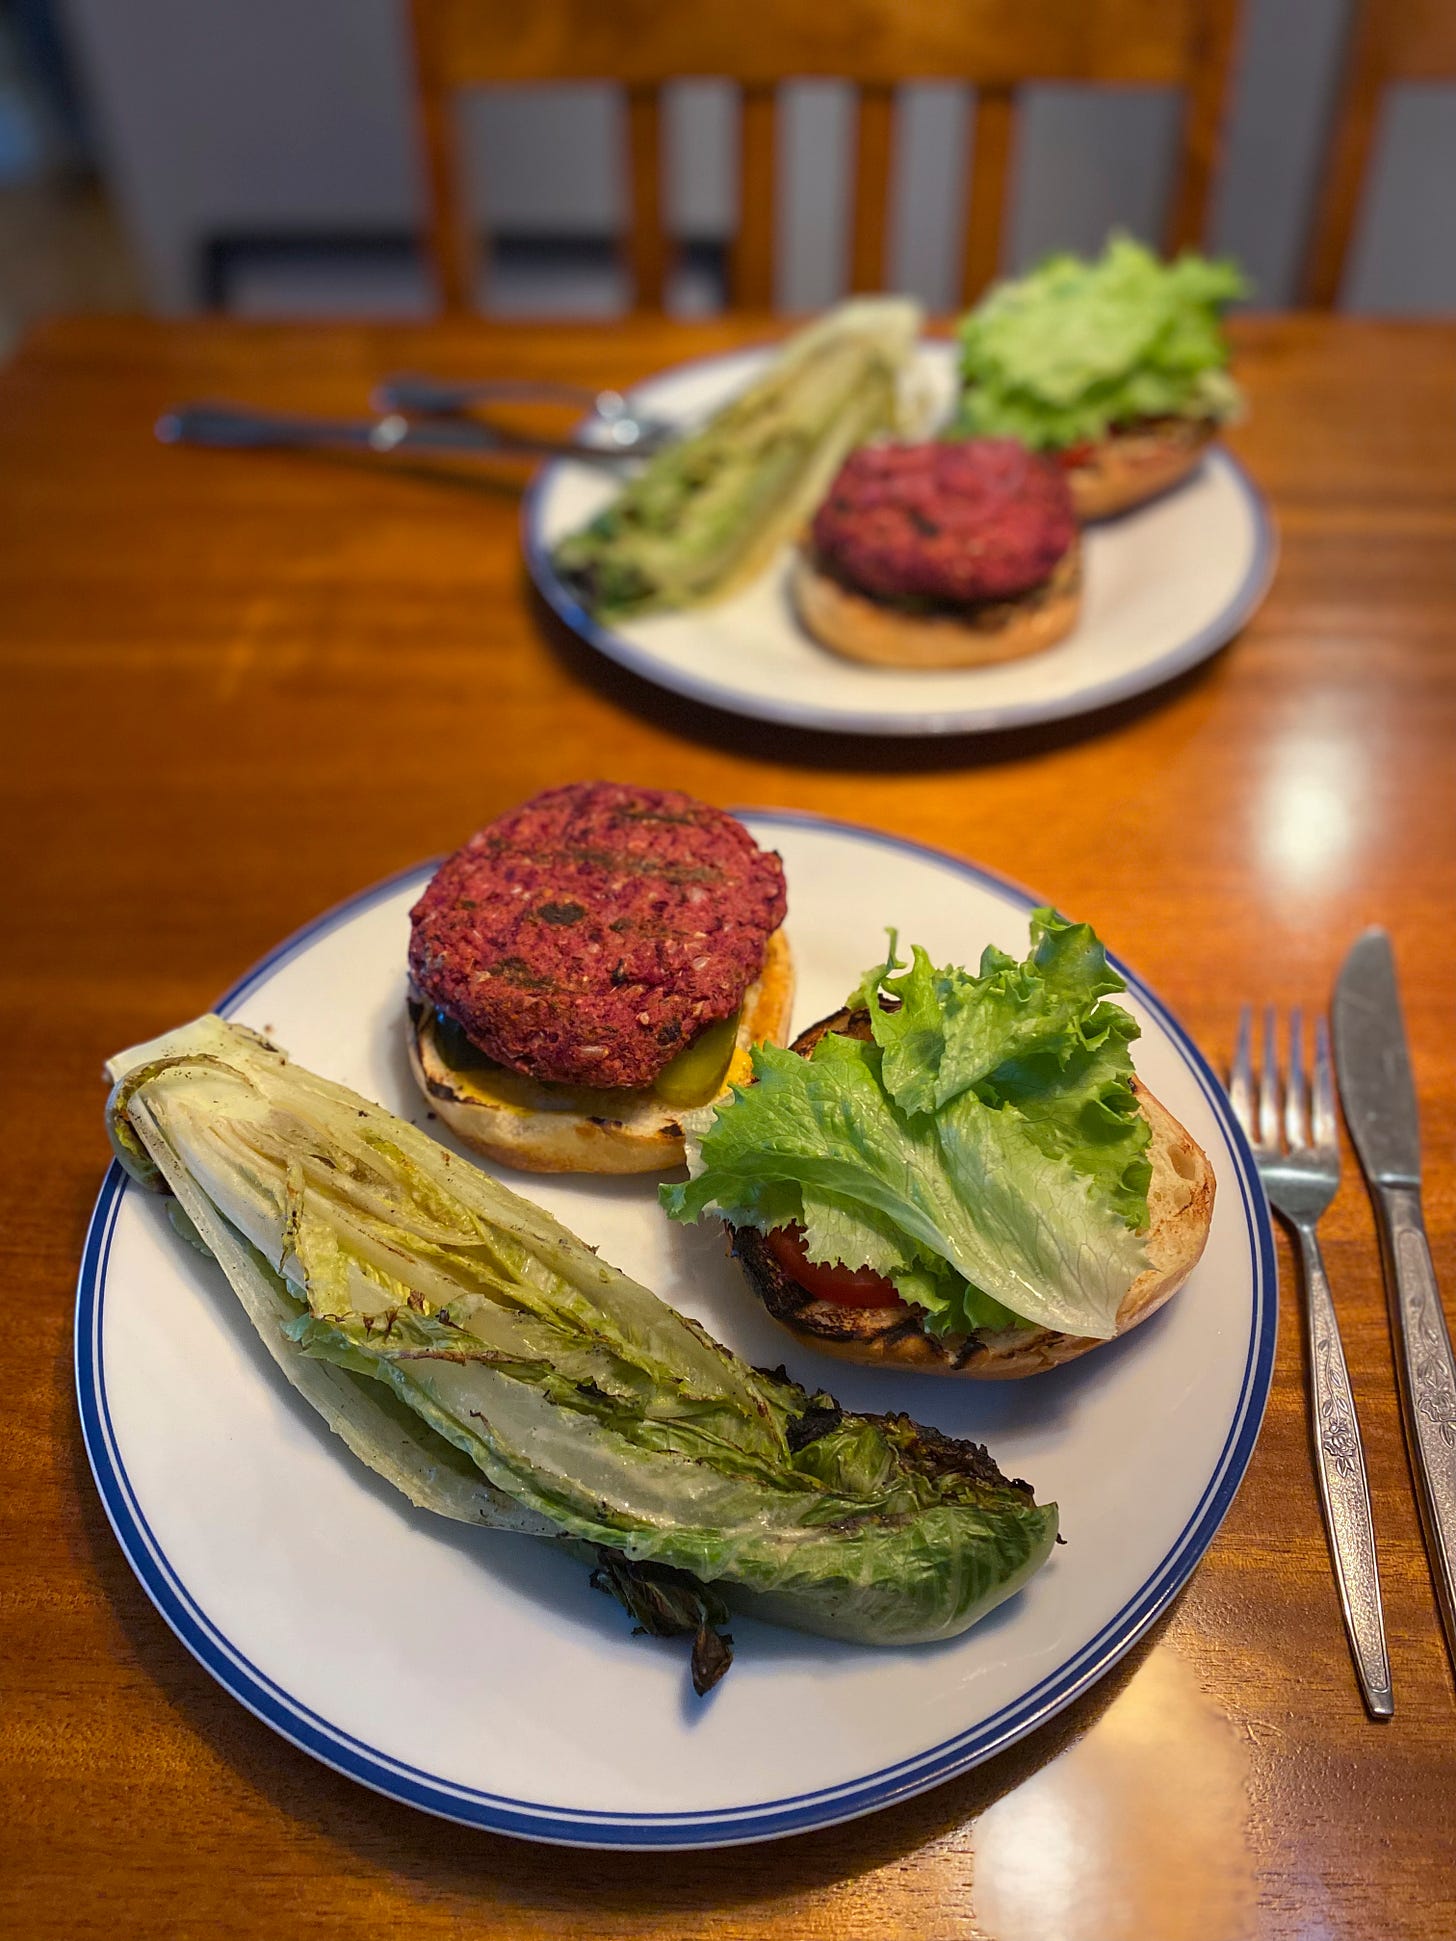 Two dinner plates, each with a burger on an open bun: one half holds the patty and pickle slices, and the other has tomato and lettuce. On the side is half a grilled romaine heart, in caesar dressing.